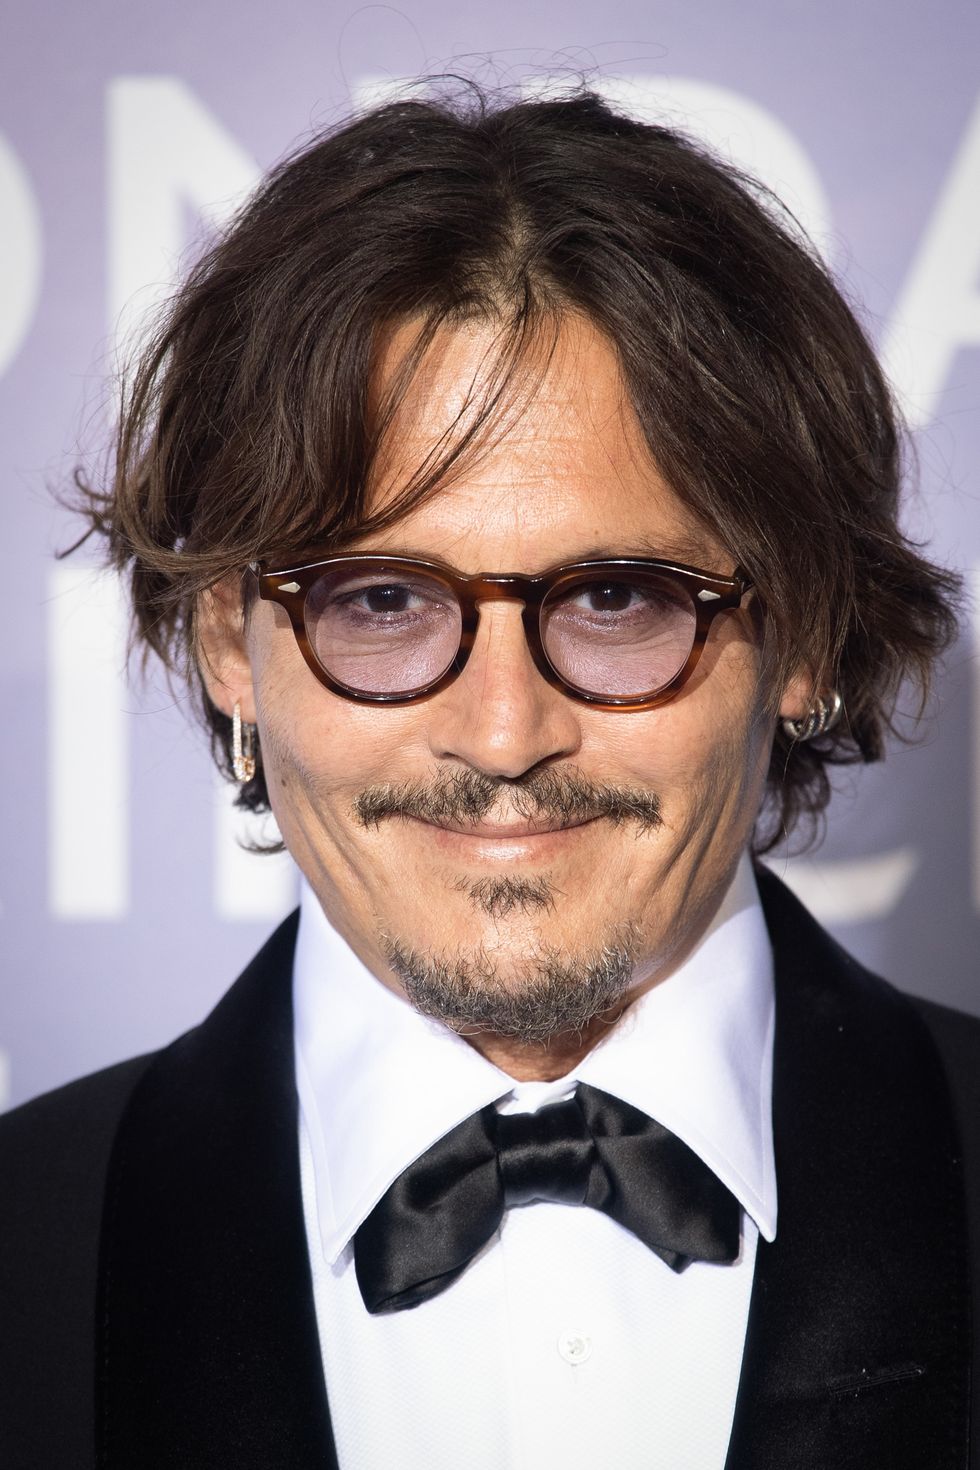 monte carlo, monaco   september 24 johnny depp attends the monte carlo gala for planetary health on september 24, 2020 in monte carlo, monaco photo by sc pool   corbiscorbis via getty images